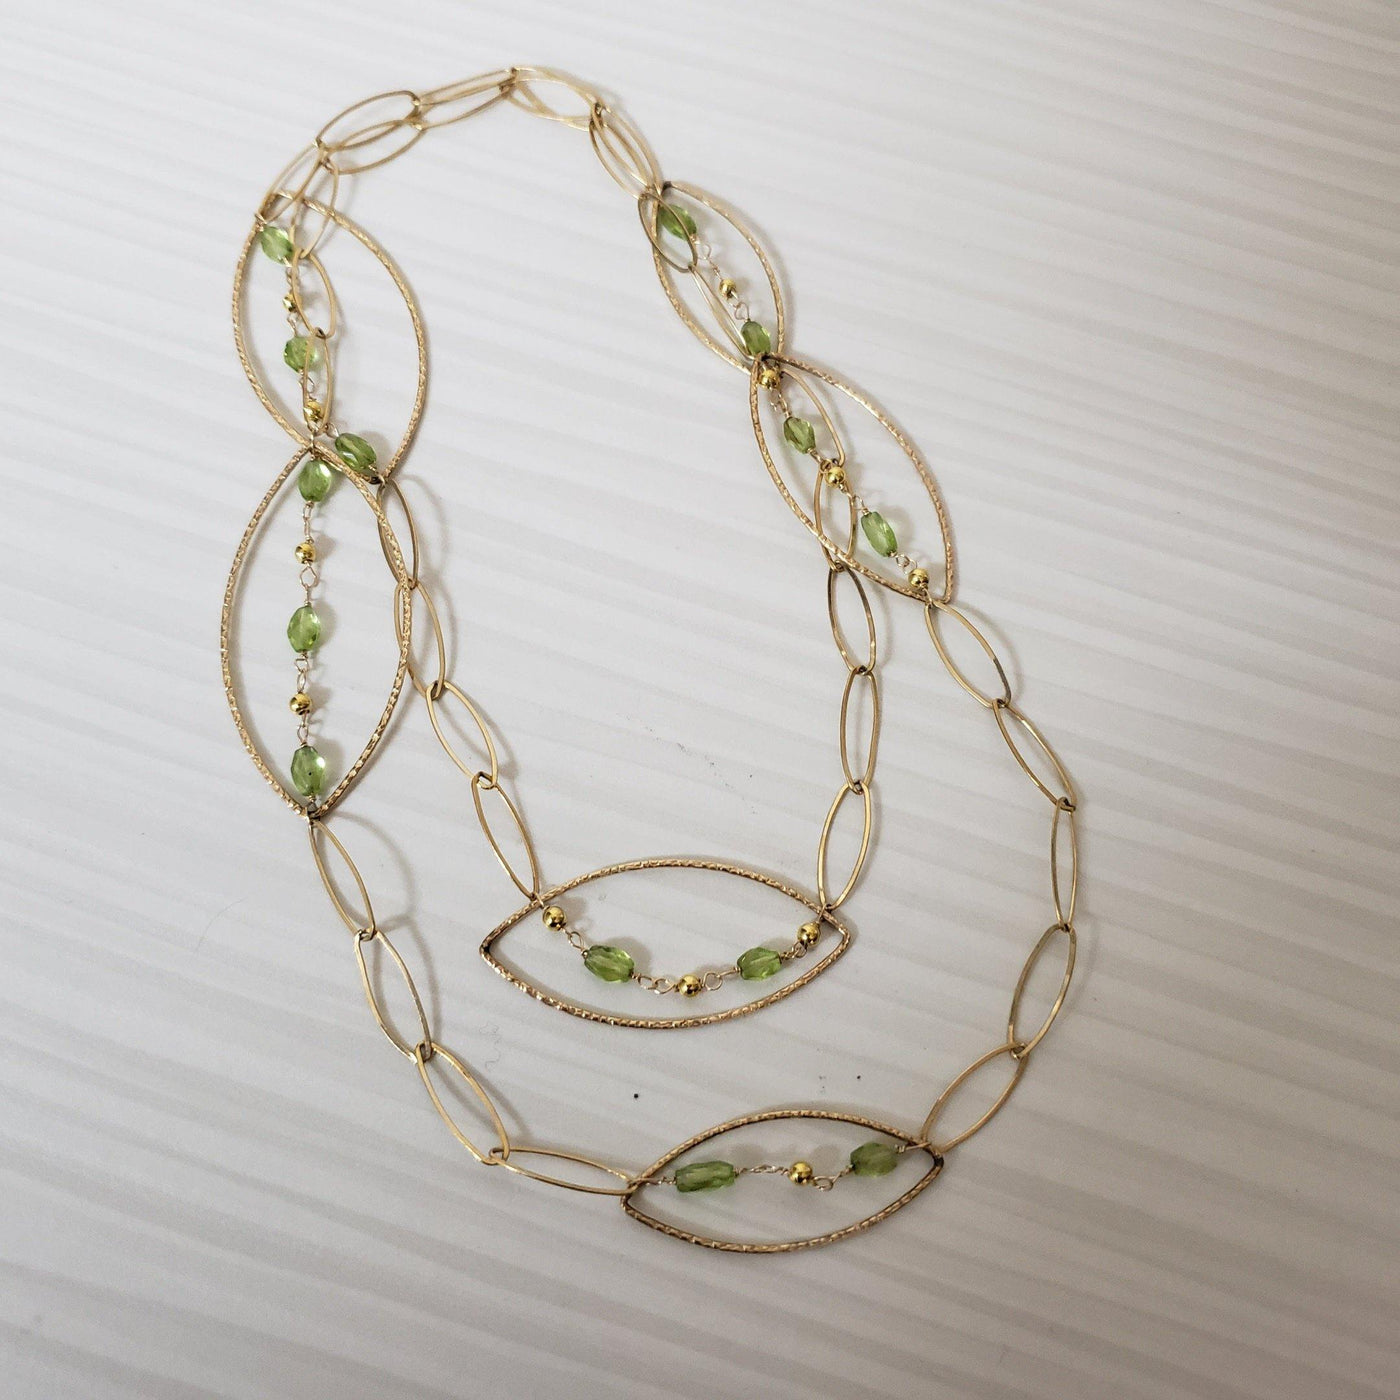 Gold-filled Peridot necklace - LB Designs